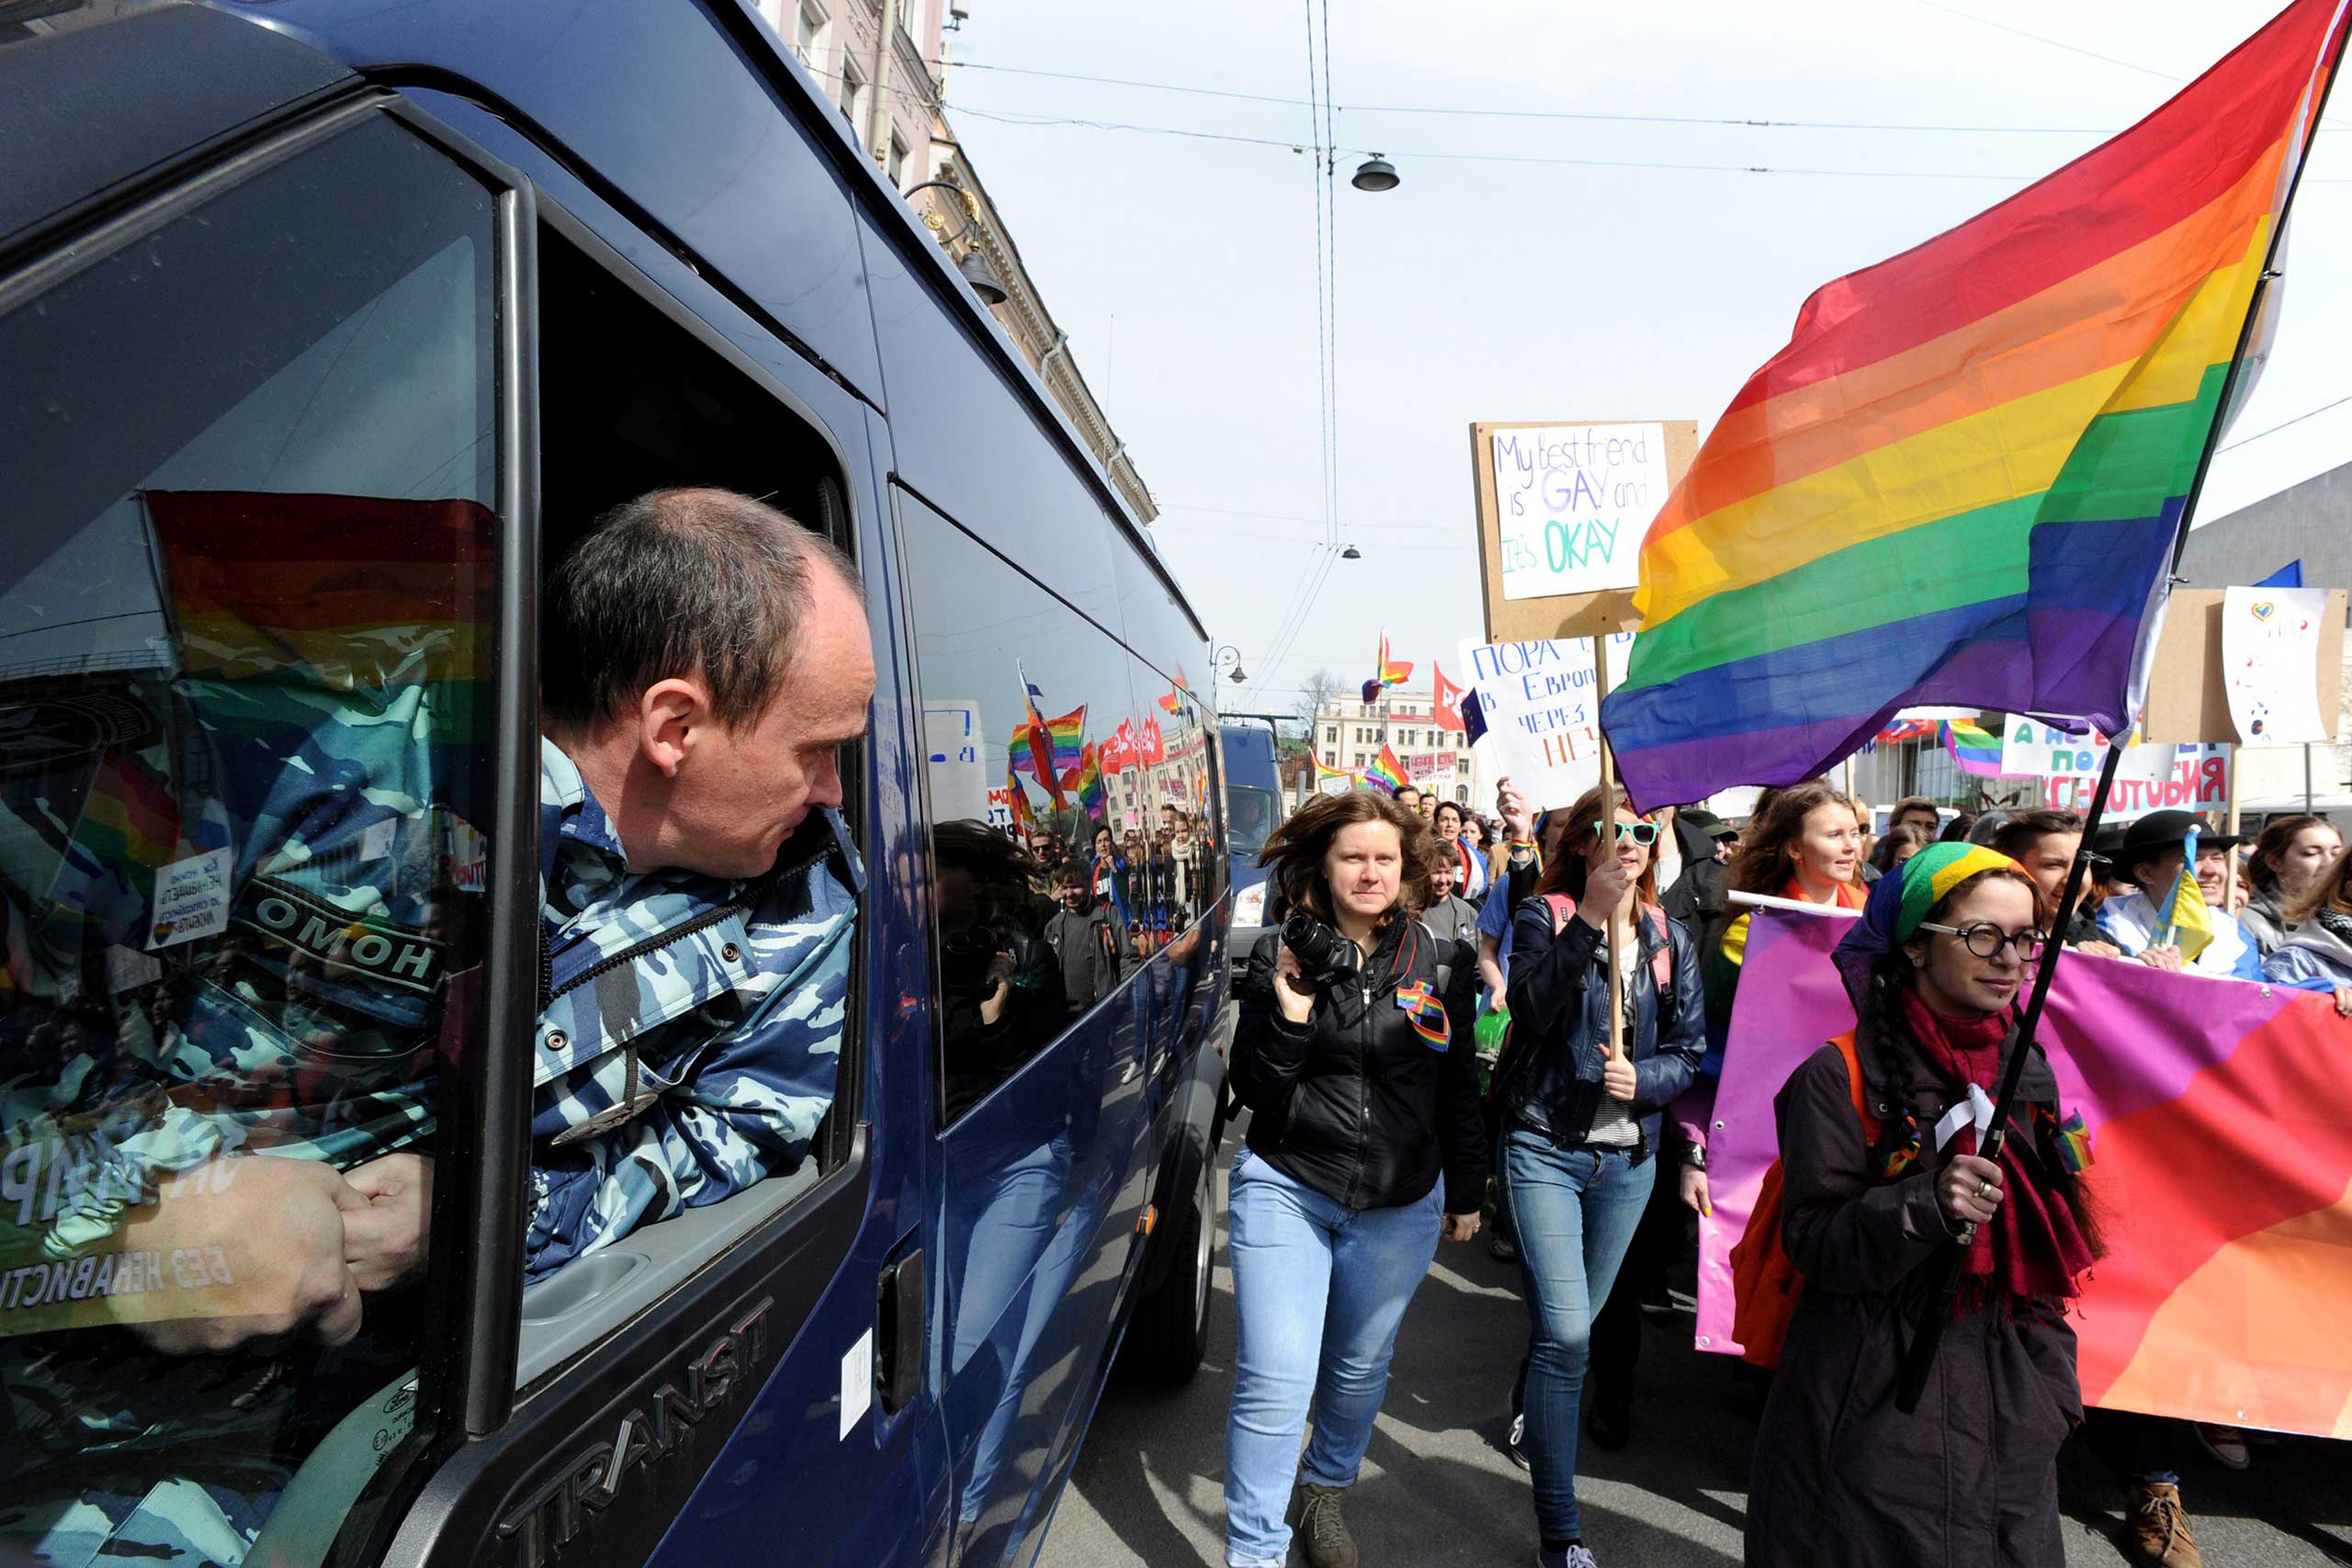 A policeman looks out from a truck as members and supporters of the LGBT community take part in a May Day rally in Saint Petersburg on May 1, 2015. (Olga Maltseva—AFP/Getty Images)